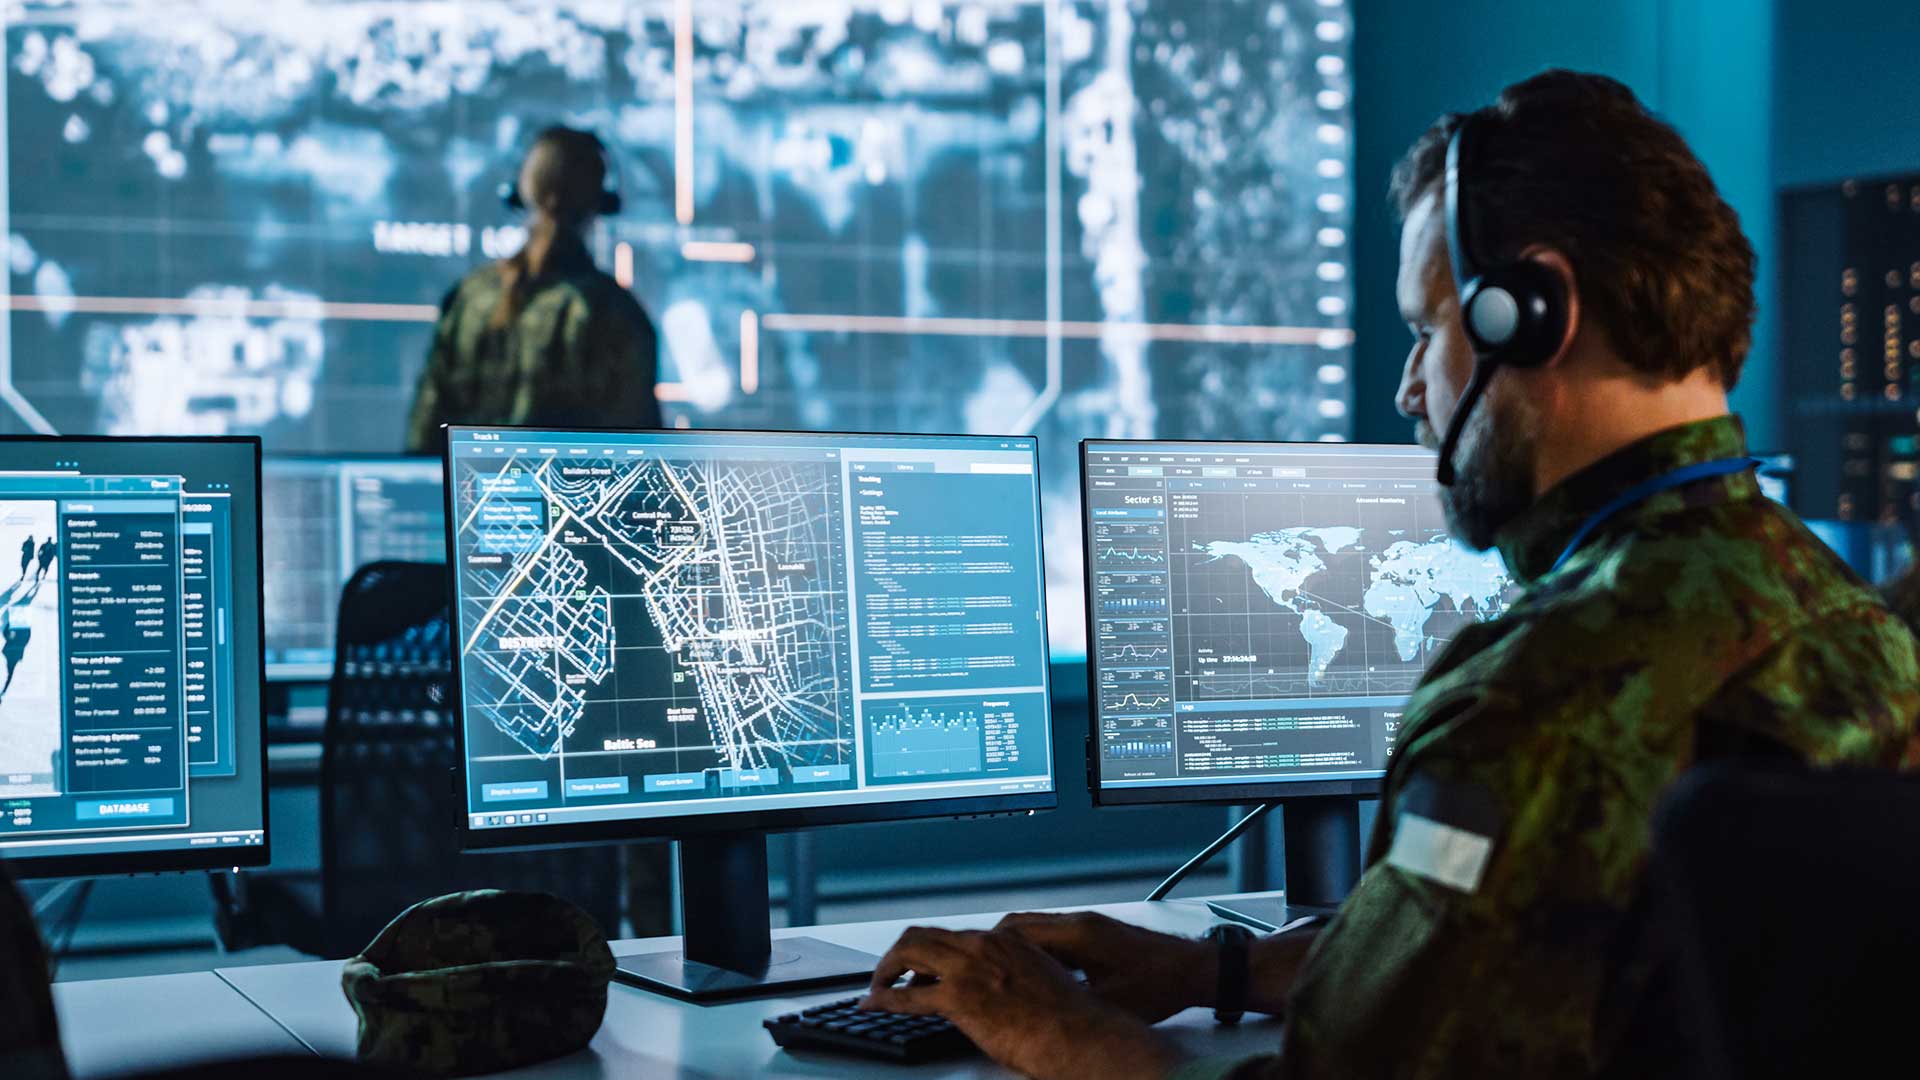 New Funding Opportunities For Defense Tech As Demand For Advanced Solutions Grows